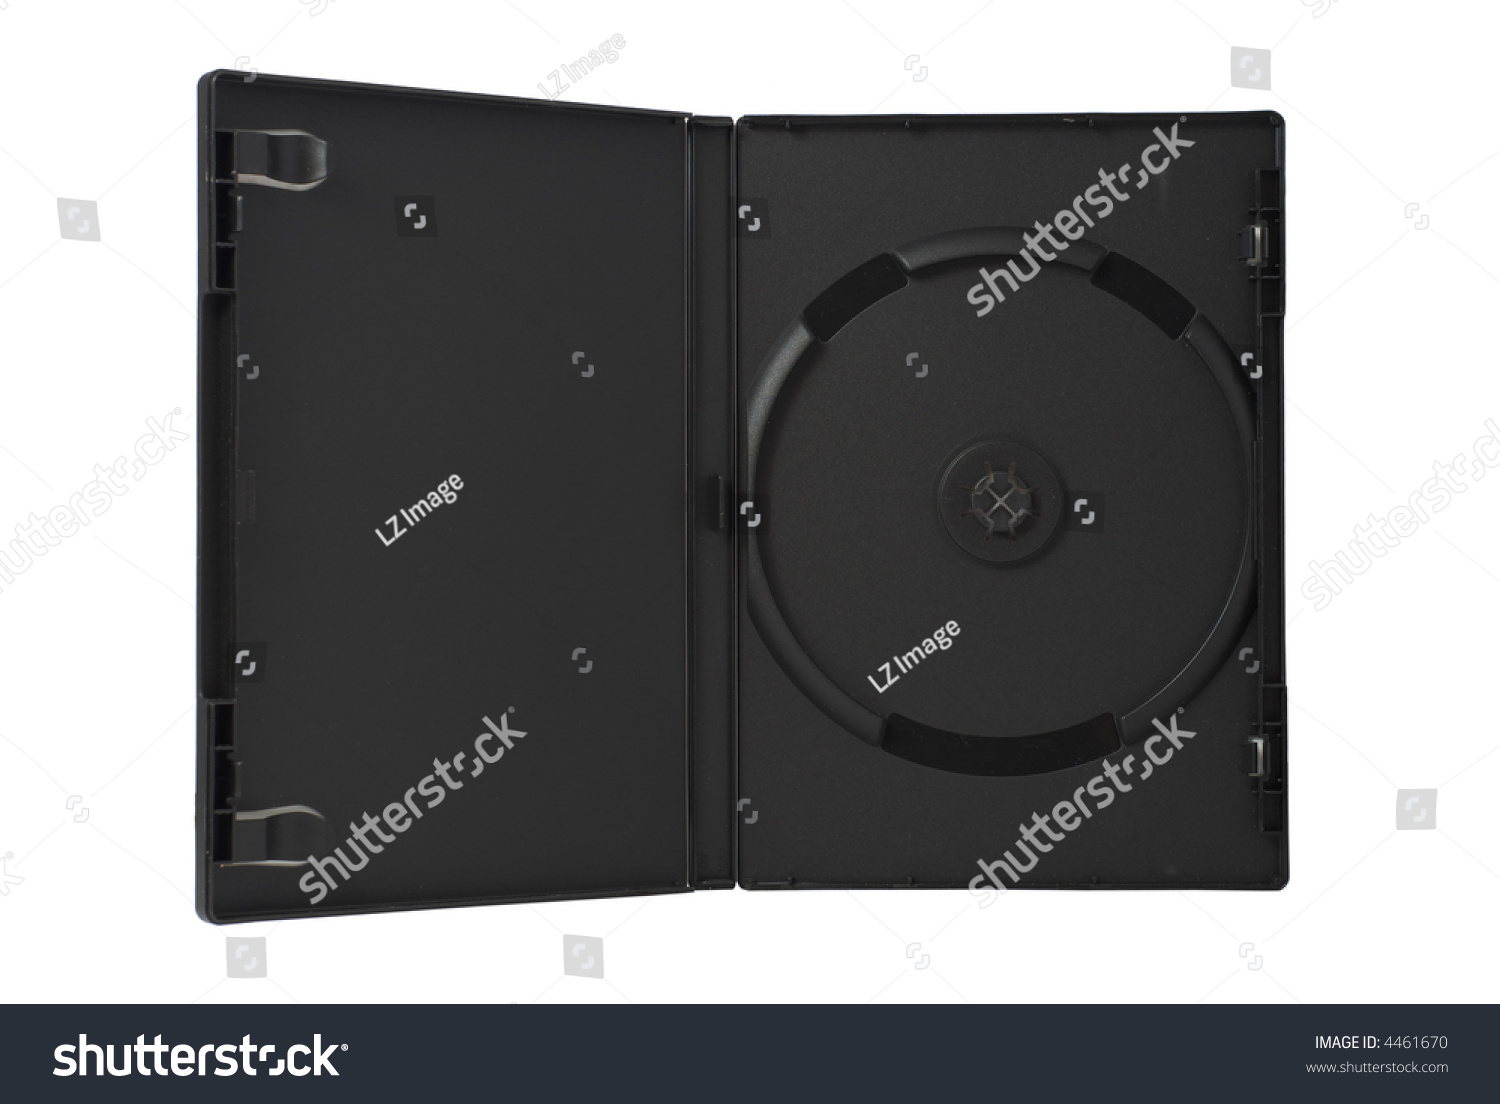 Blank CD/DVD/Blue Ray BOX. Isolated on white background #4461670